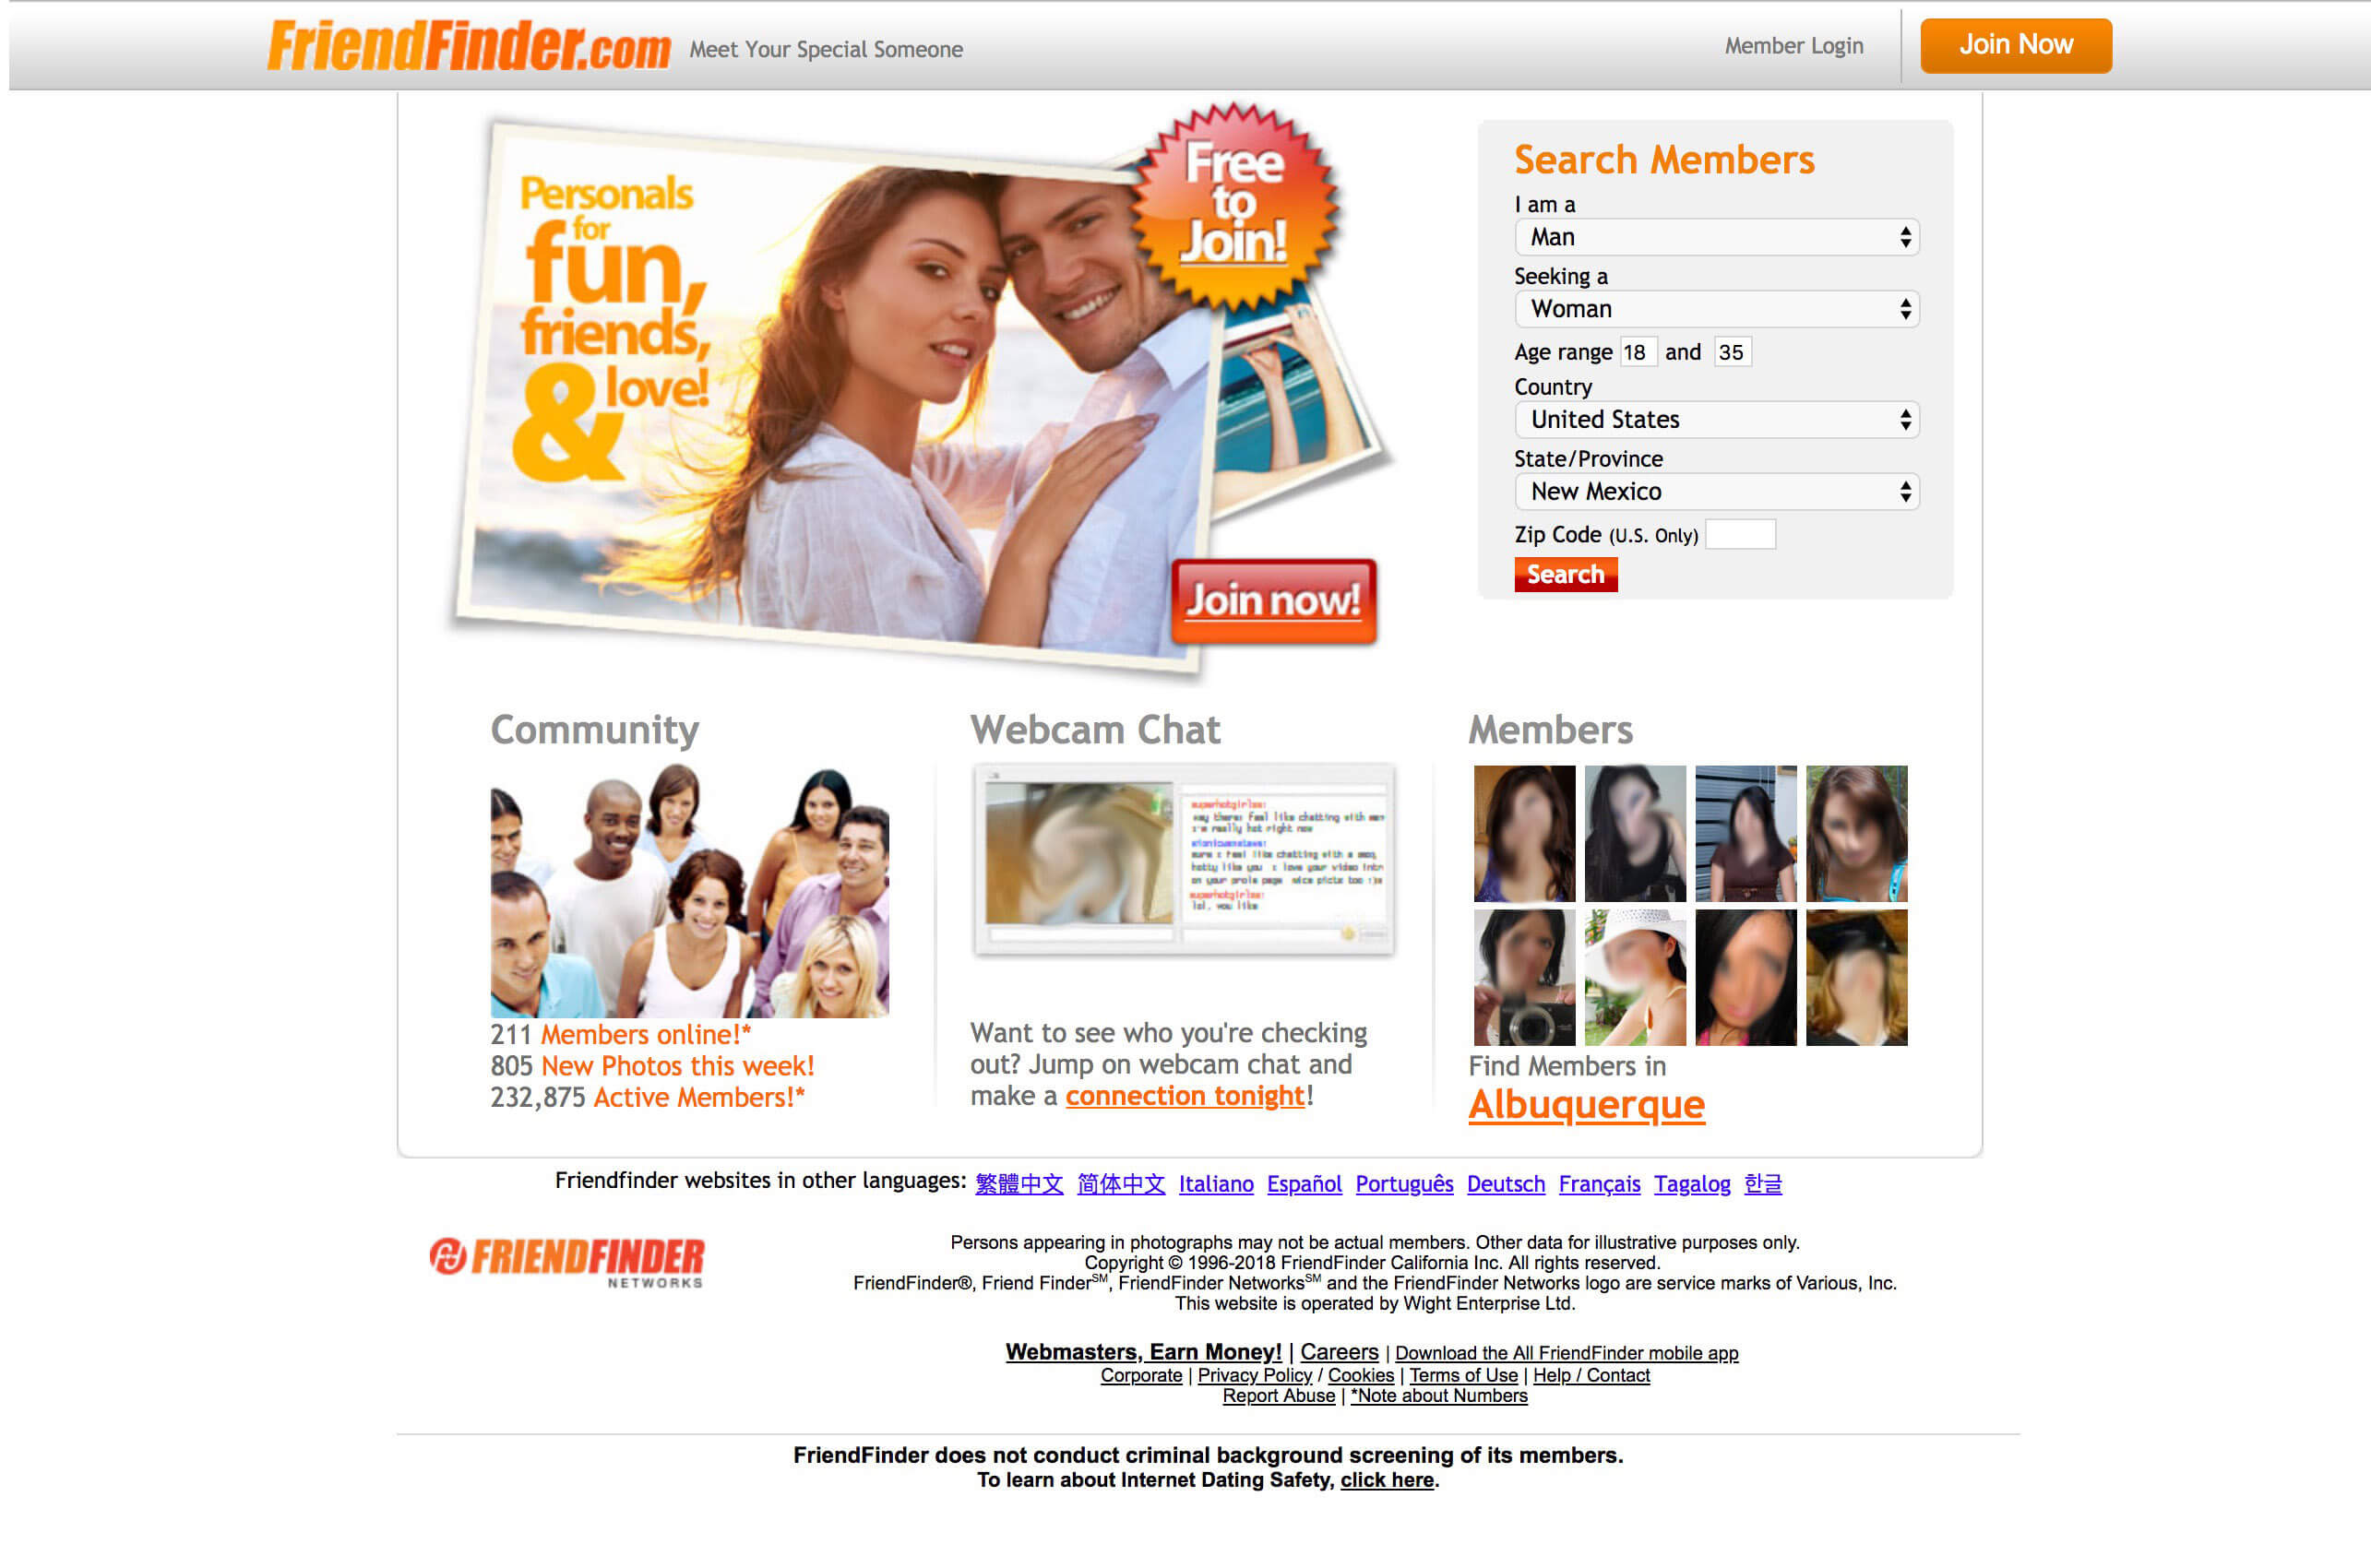 can you make money becoming an affiliate of friendfinder